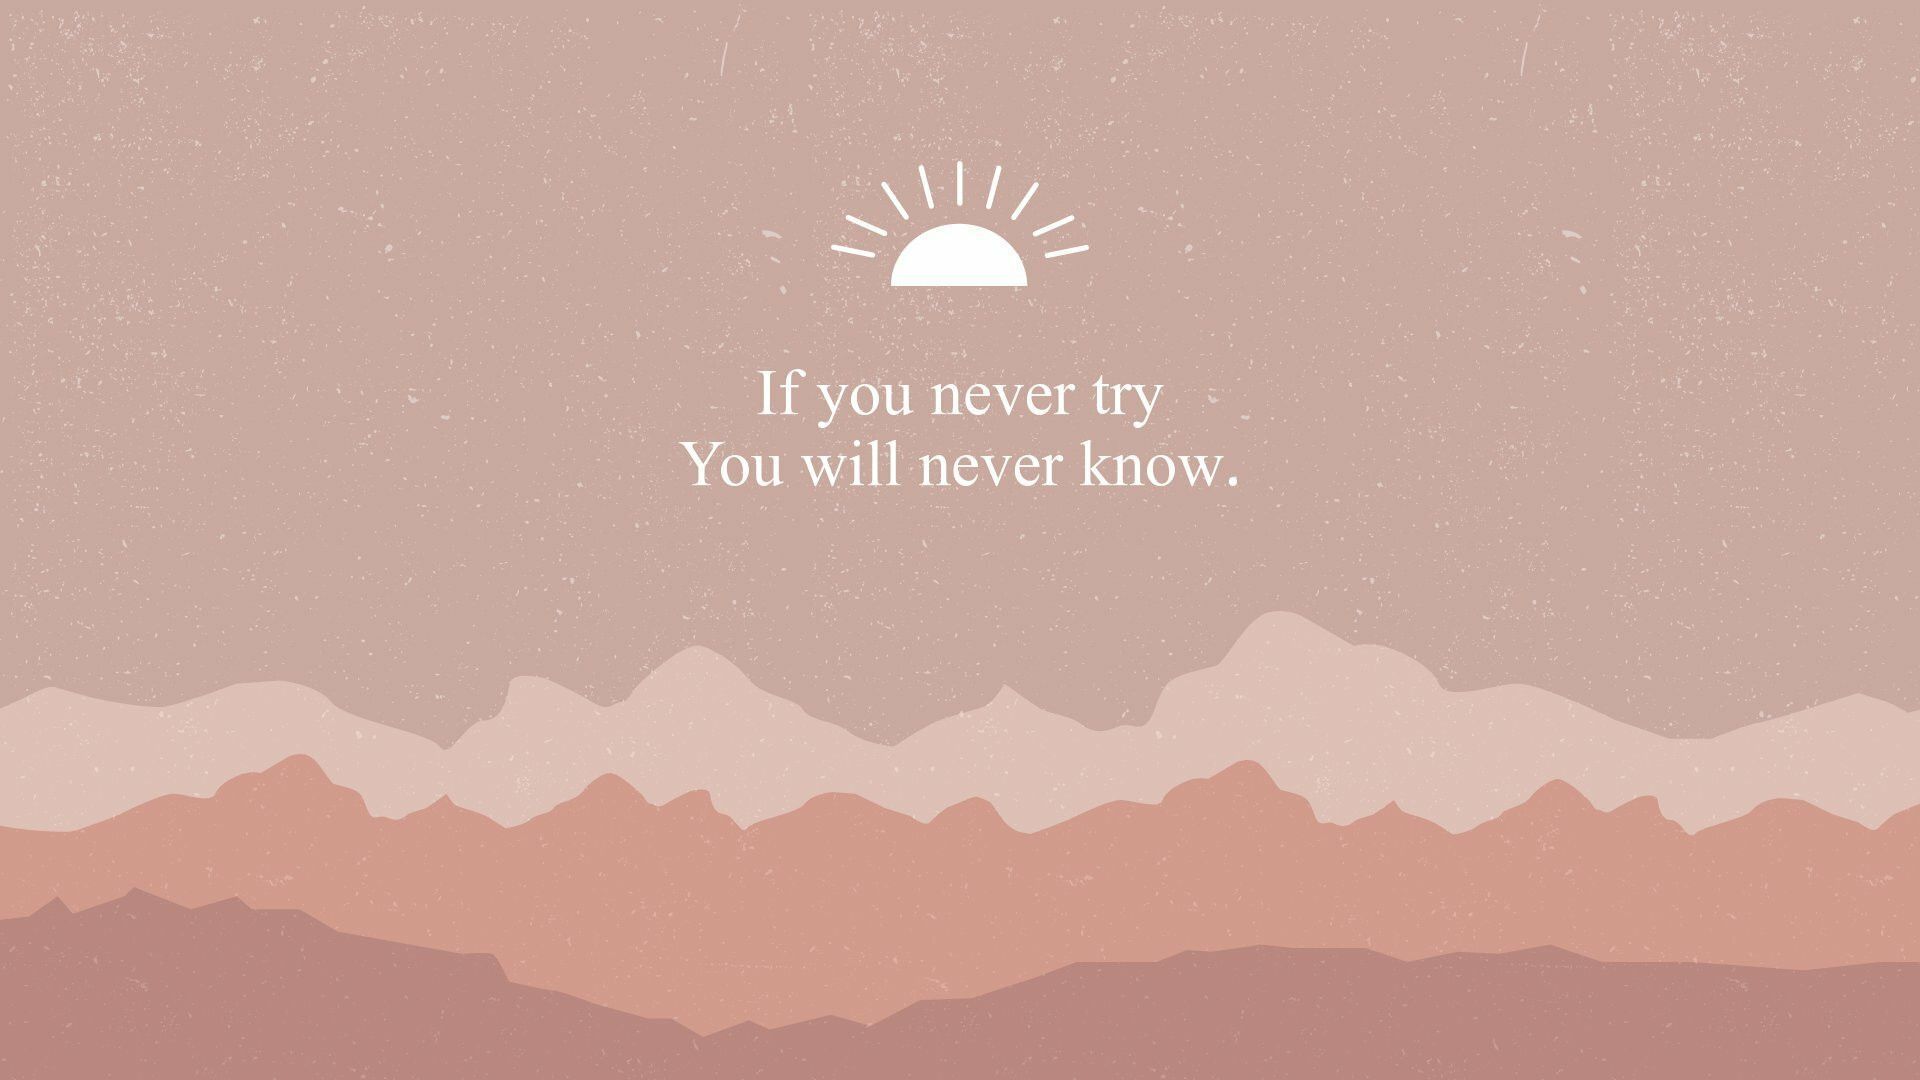 If you never try, you will never know. - Cool, science, mountain